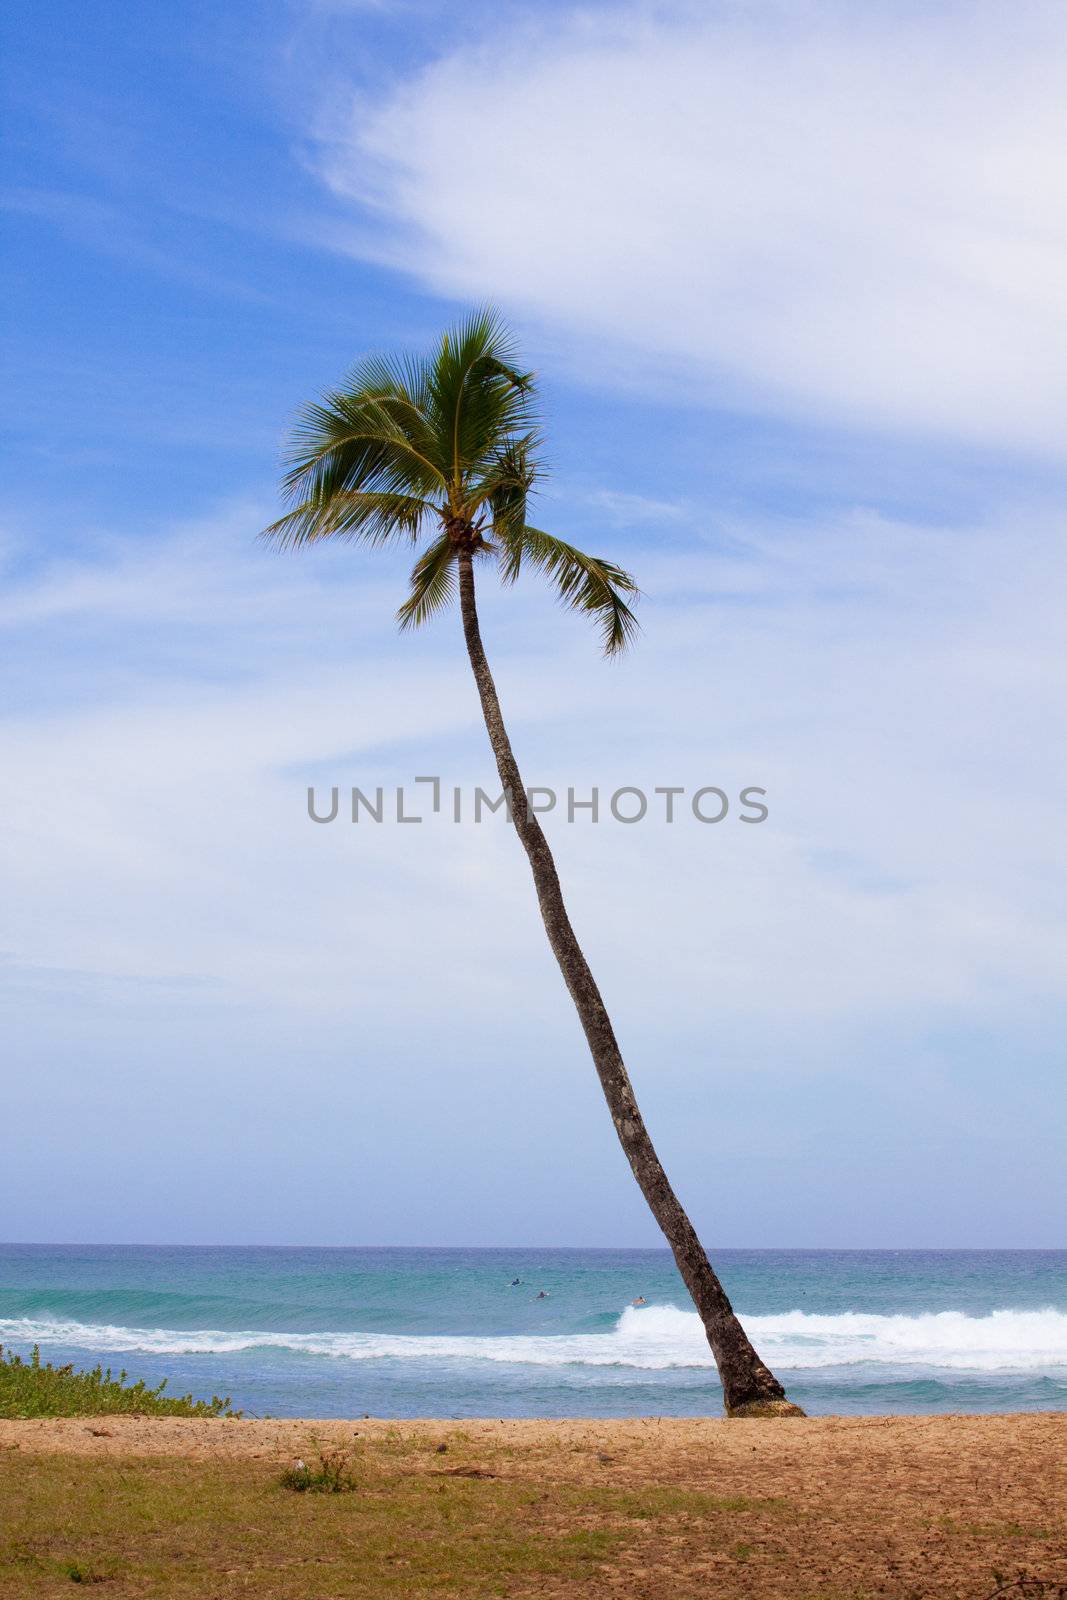 A palm tree juts out from the shore diagonally at sunset beach in oahu hawaii.